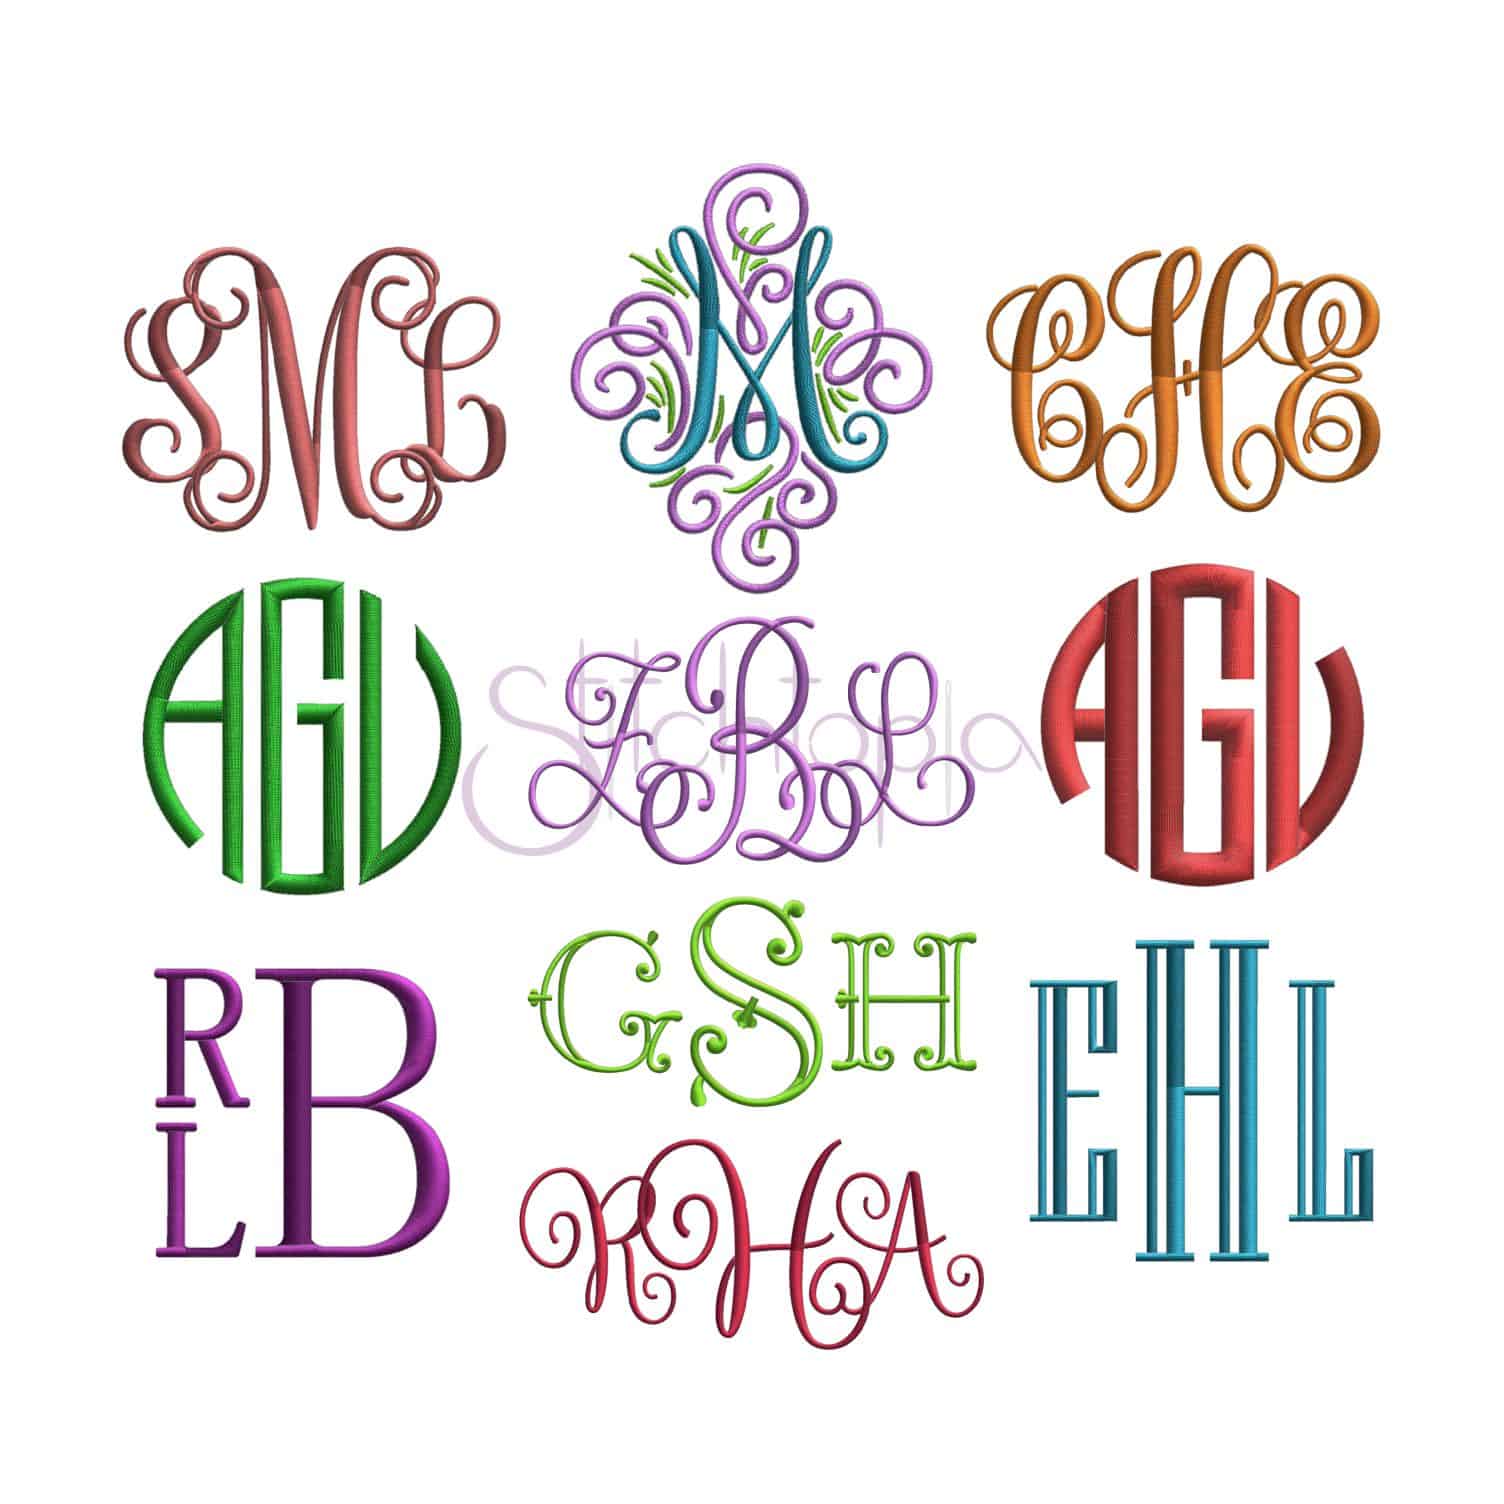 embroidery-fonts-bx-embroidery-designs-machine-embroidery-fonts-4-sizes